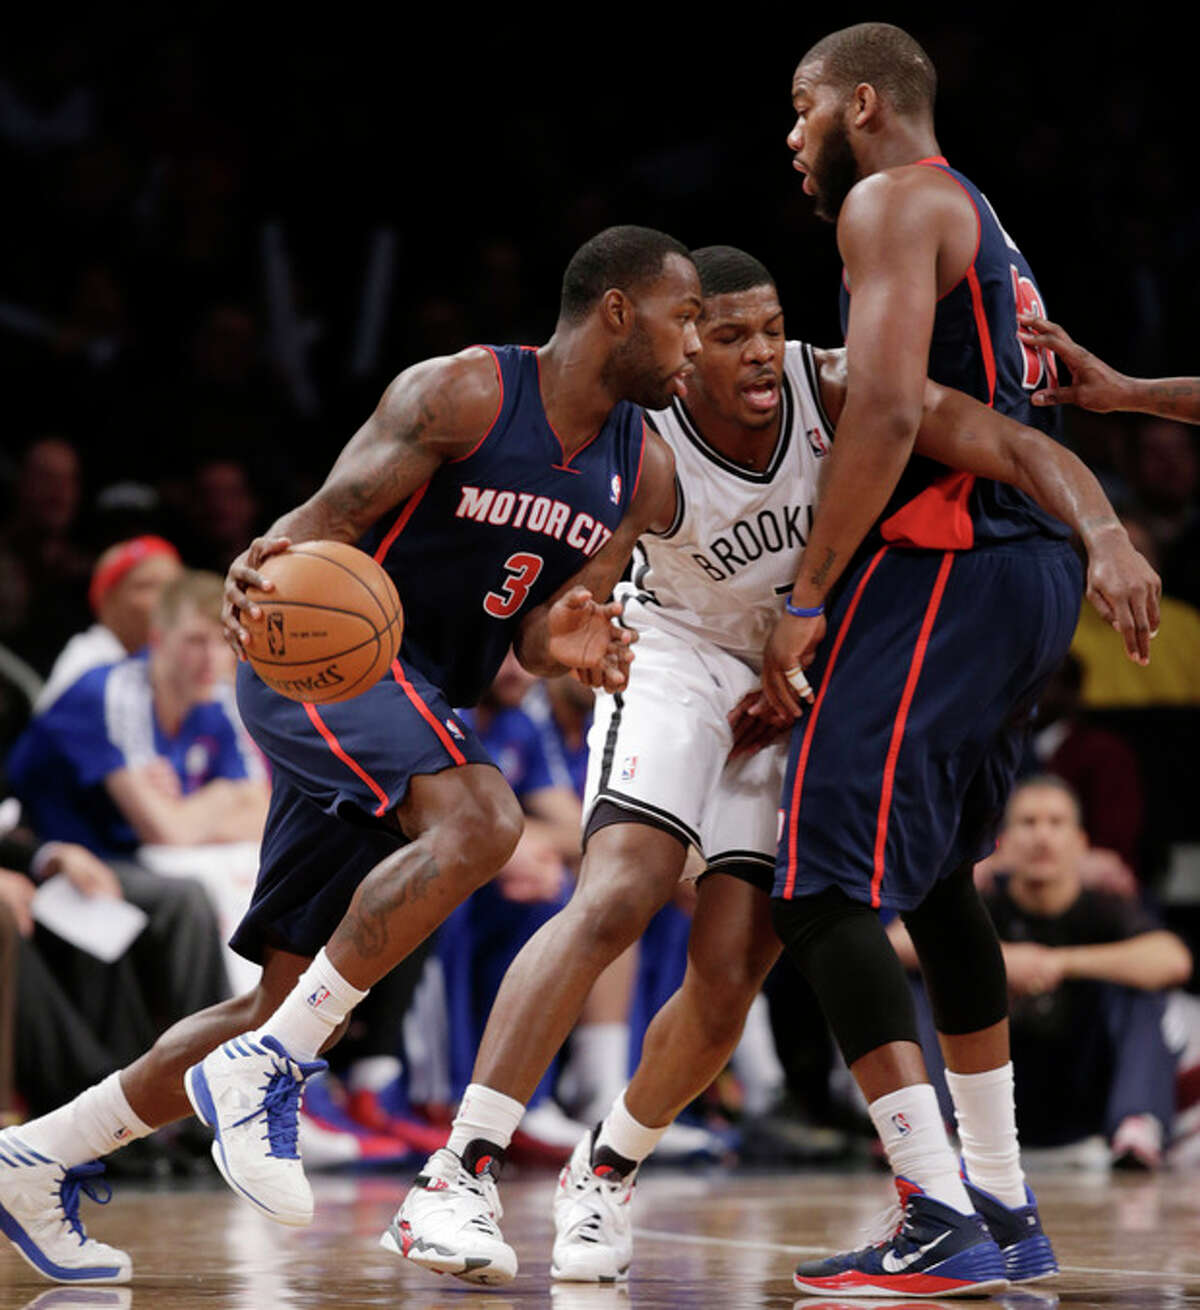 Brooklyn Nets guard Joe Johnson (7) defends as Detroit Pistons guard Rodney Stuckey (3) drives to the basket with Pistons forward Greg Monroe (10) looking on in the first half of an NBA basketball game, Sunday, Nov. 24, 2013, in New York. (AP Photo/Kathy Willens)